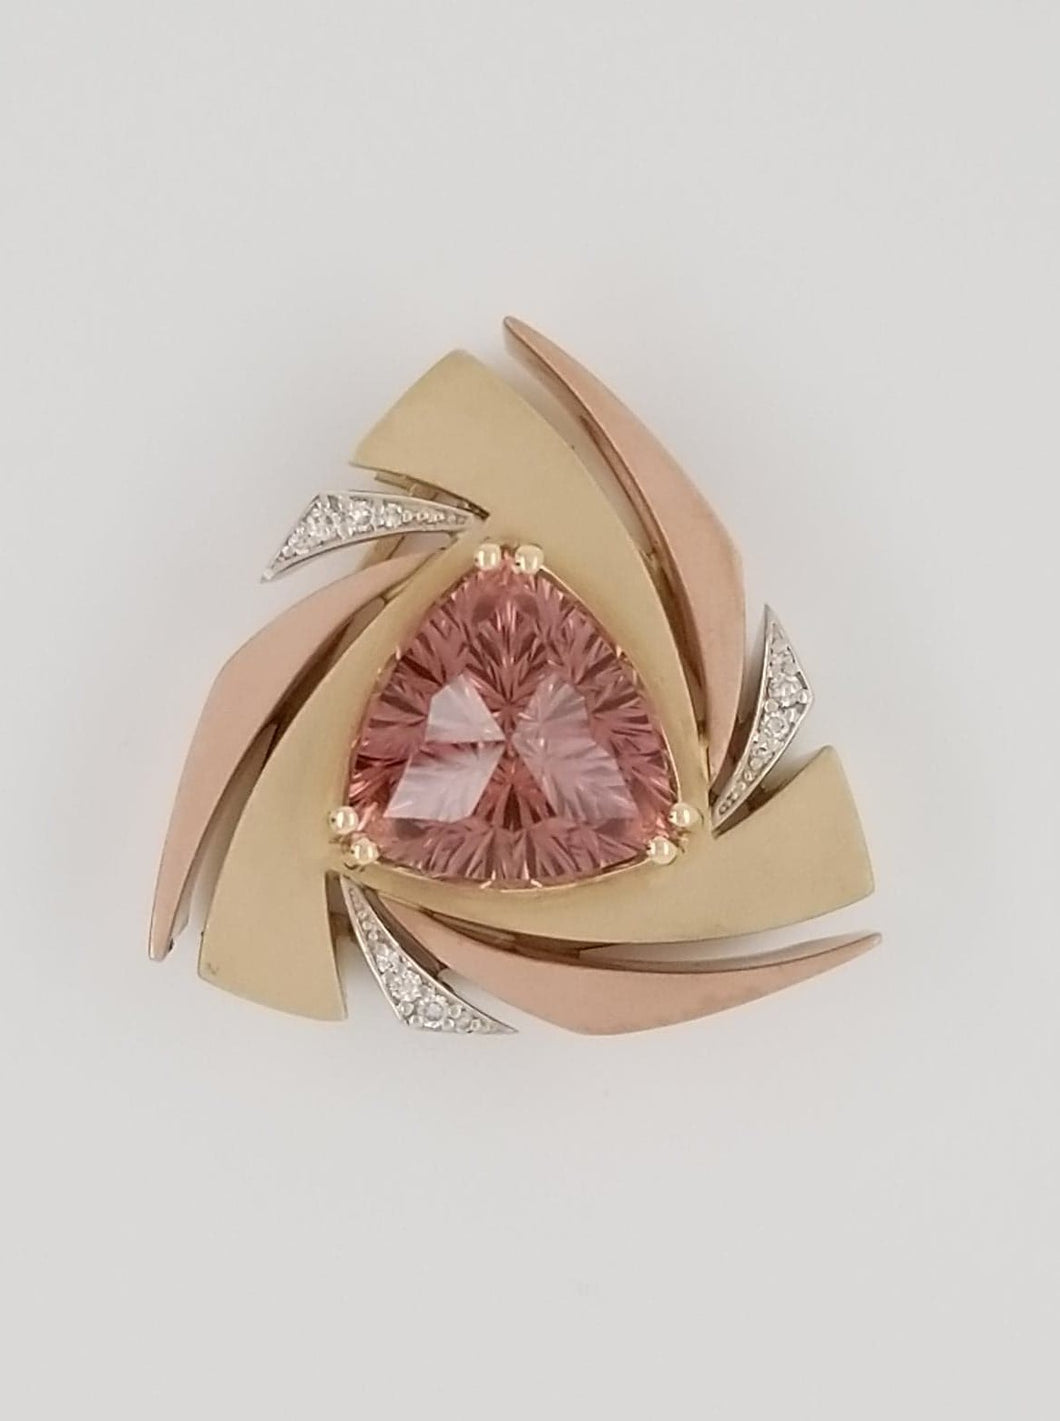 Nigerian Pink Tourmaline Pendant with a 7.93ct flawless stone Trillion Concave, Spiral, Brilliant Starburst cut by World Class Cutter Mark Gronlund!